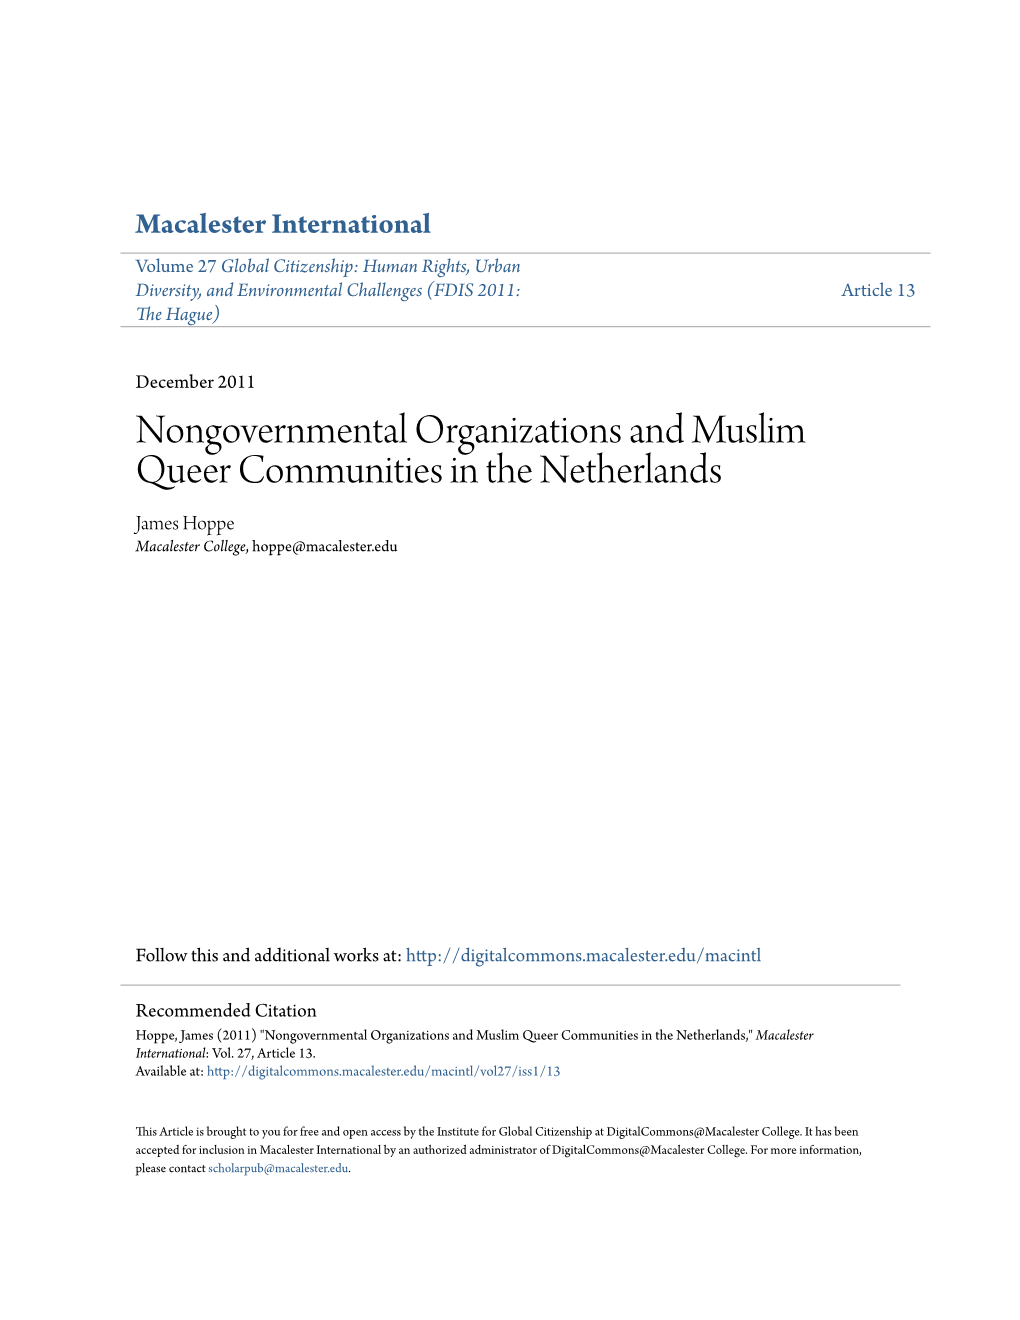 Nongovernmental Organizations and Muslim Queer Communities in the Netherlands James Hoppe Macalester College, Hoppe@Macalester.Edu